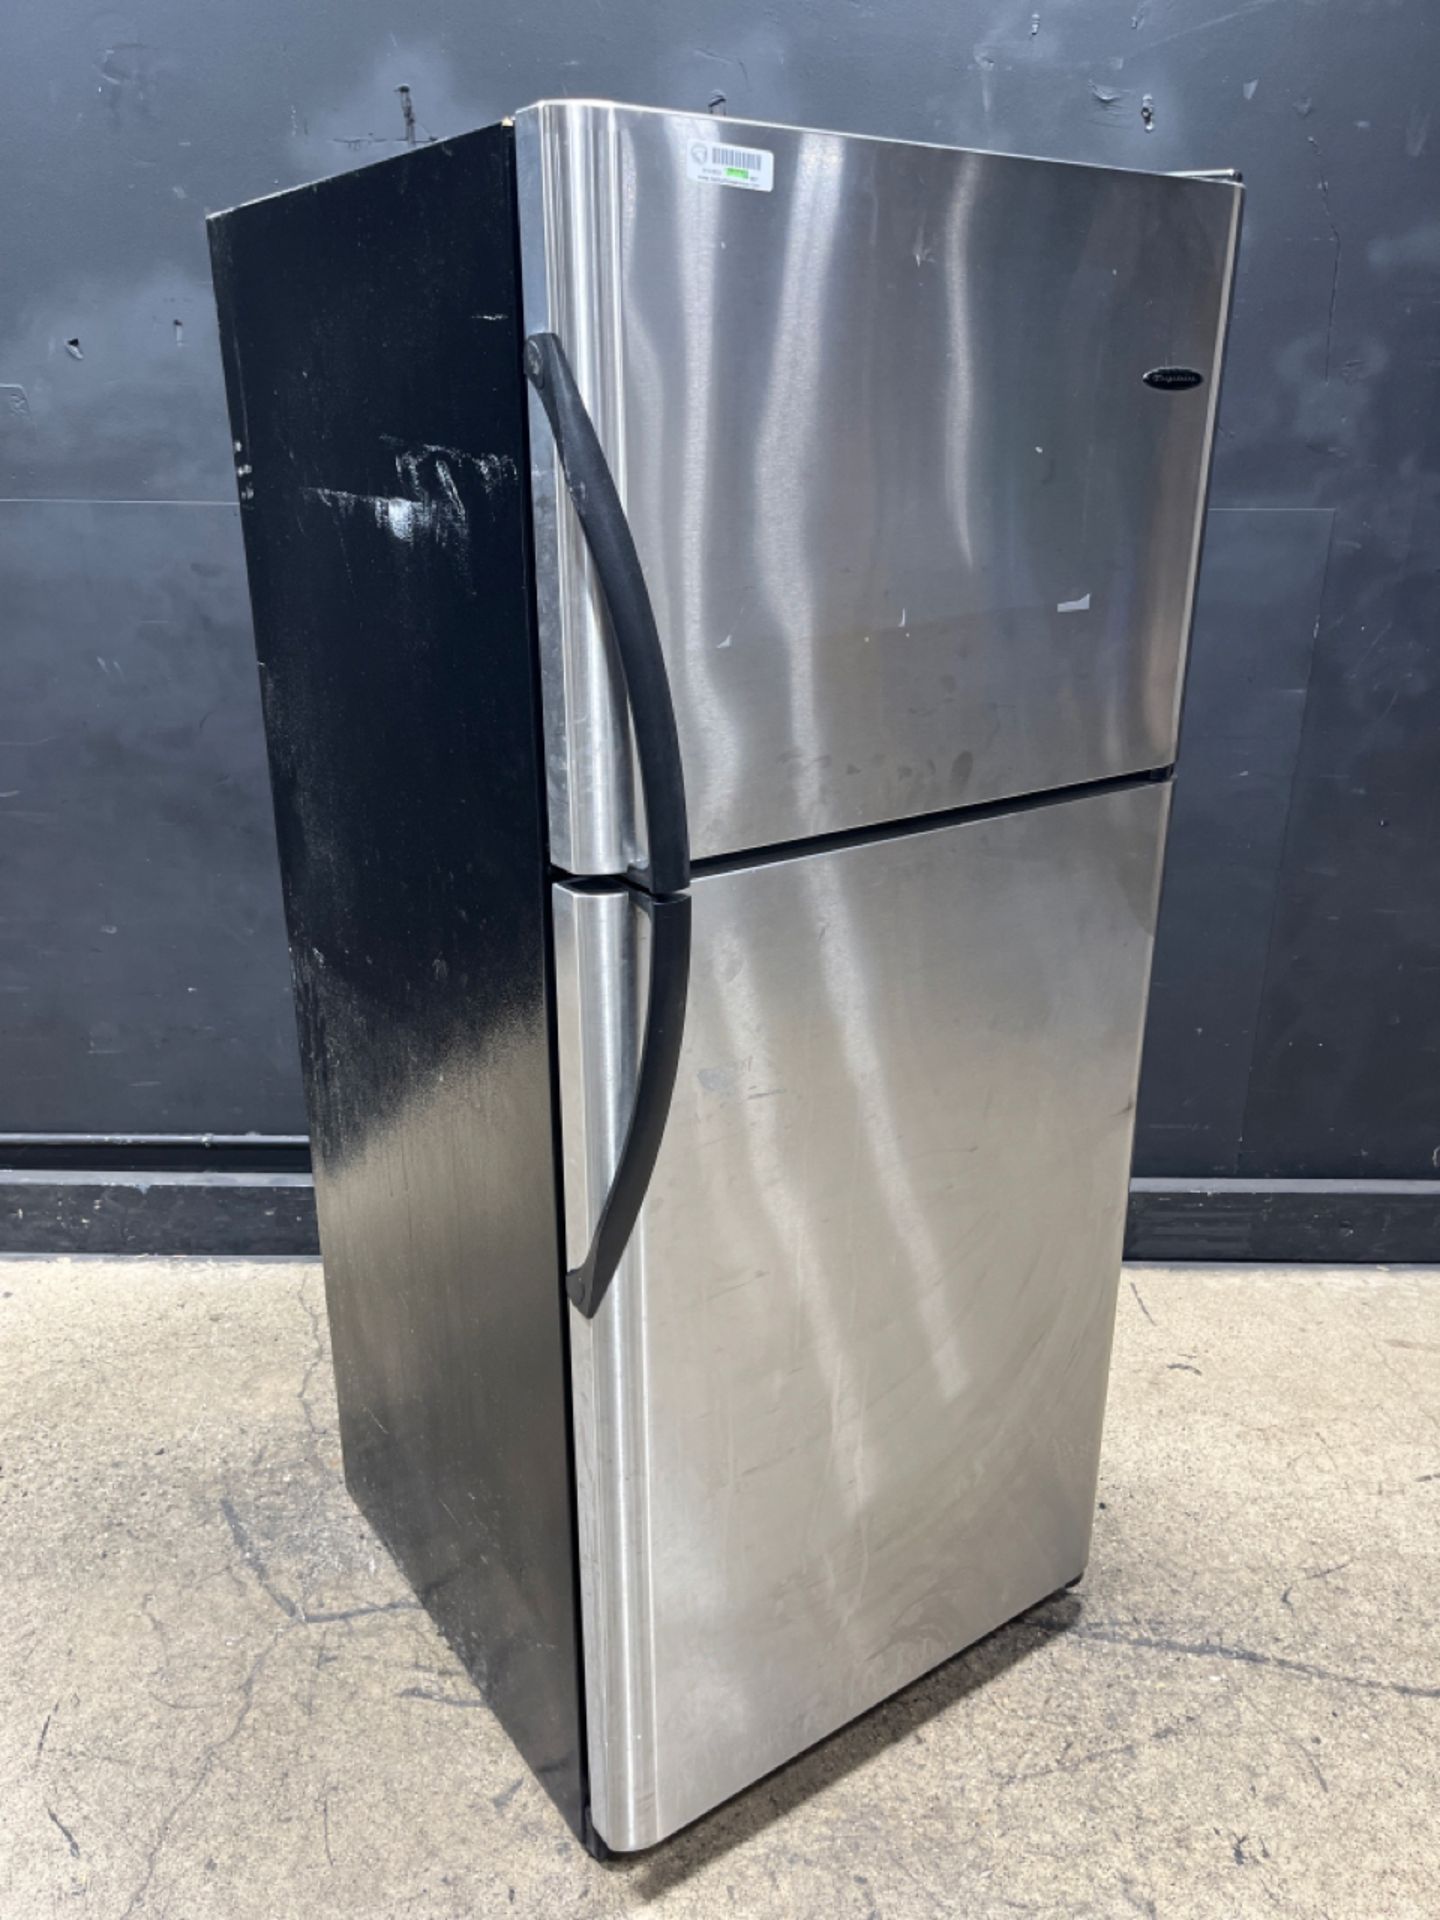 FRIGIDAIRE REFRIGERATOR (LOCATED AT 3325 MOUNT PROSPECT ROAD, FRANKLIN PARK, IL, 60131)